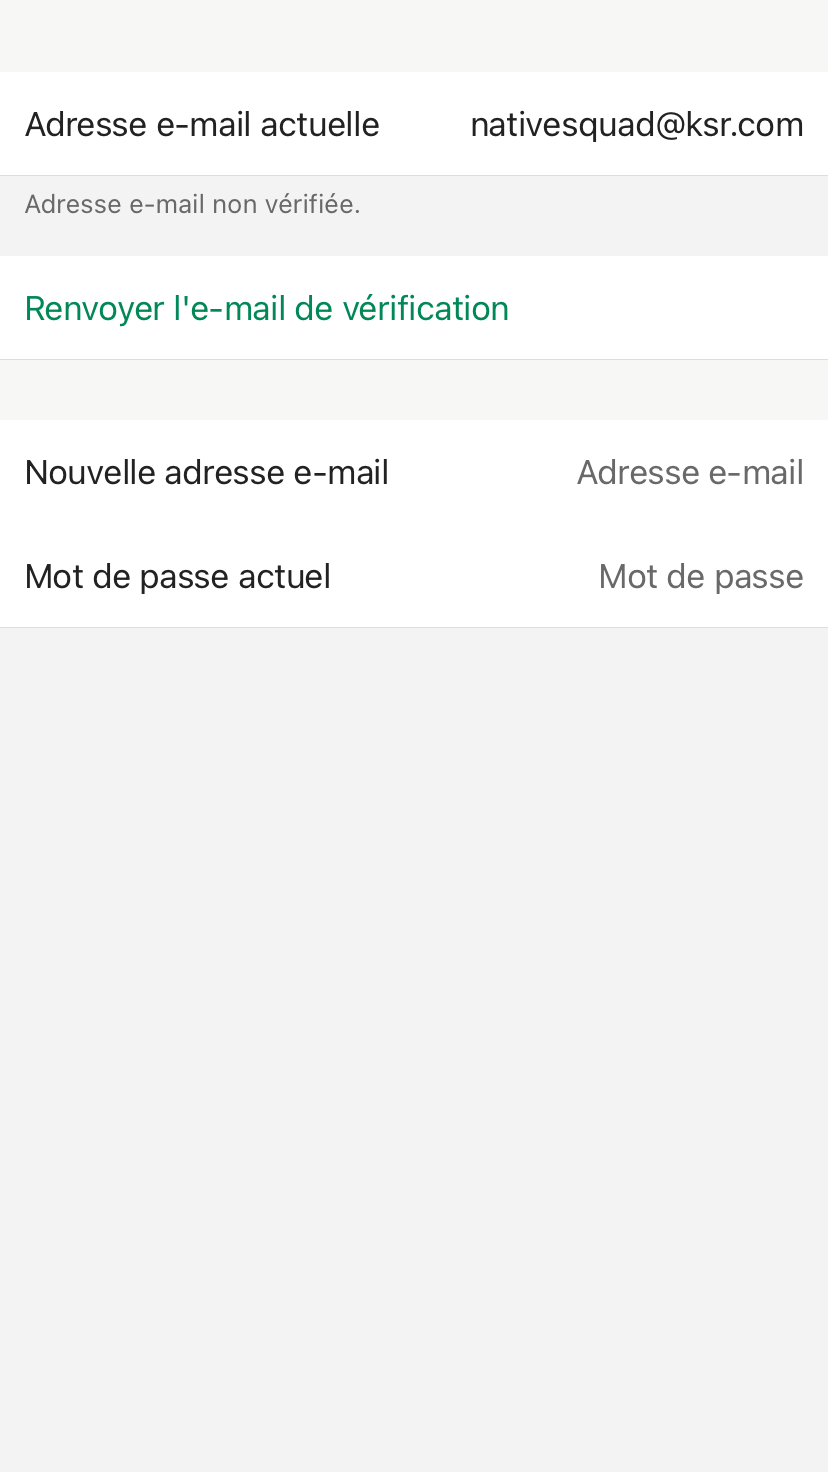 testChangeEmailScreen_unverifiedEmail_isCreator.lang_fr_device_phone5_5inch.png